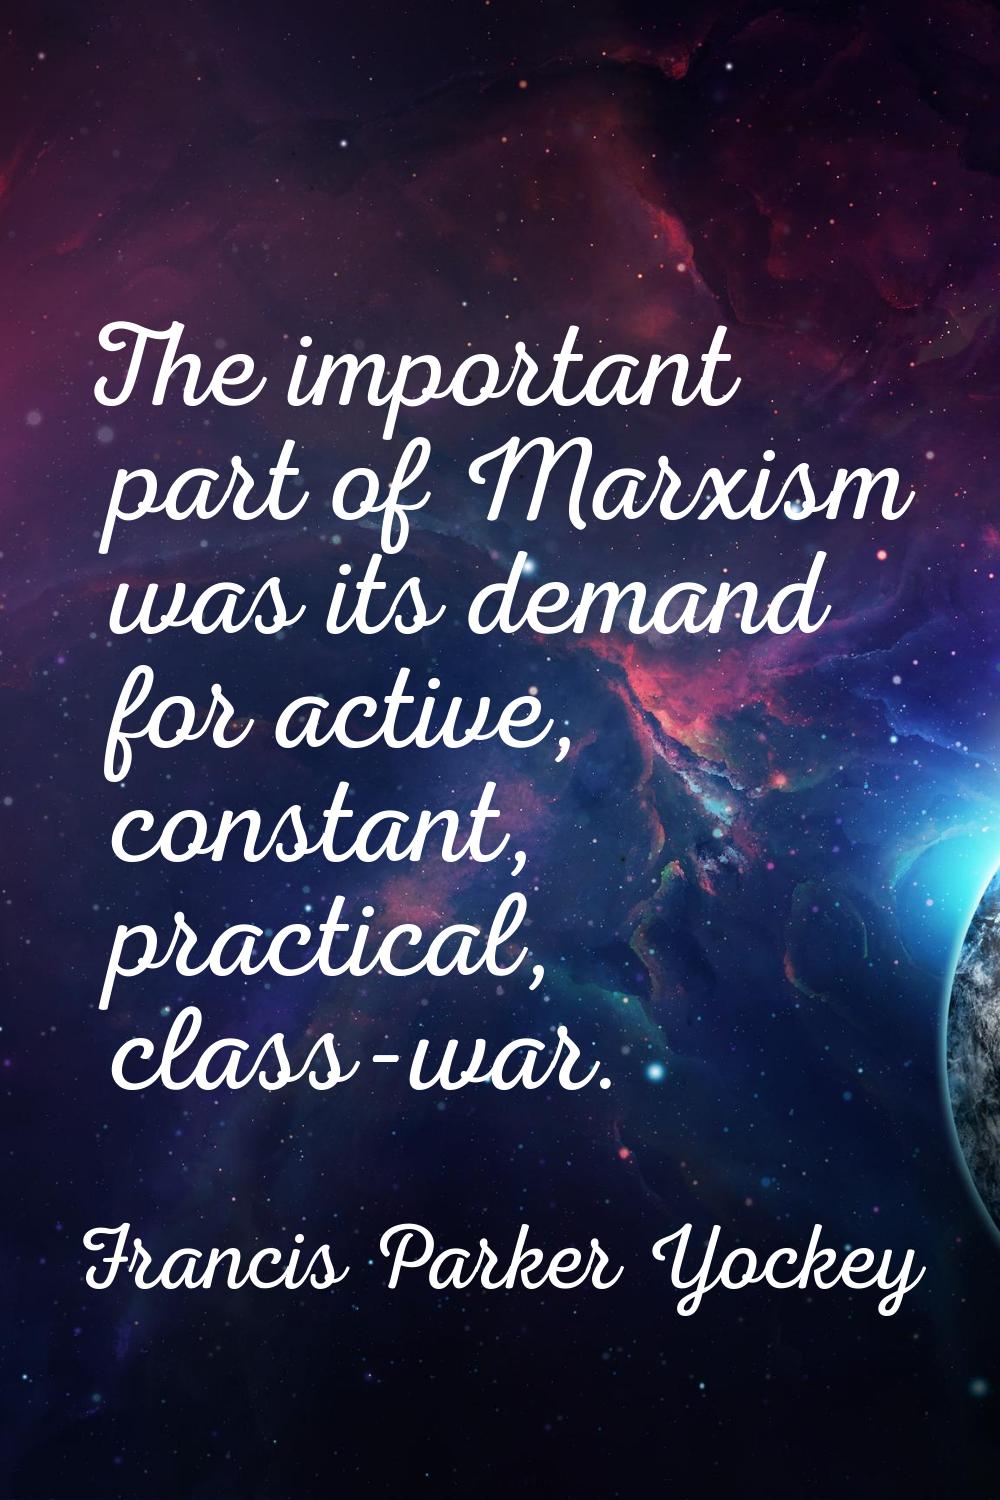 The important part of Marxism was its demand for active, constant, practical, class-war.